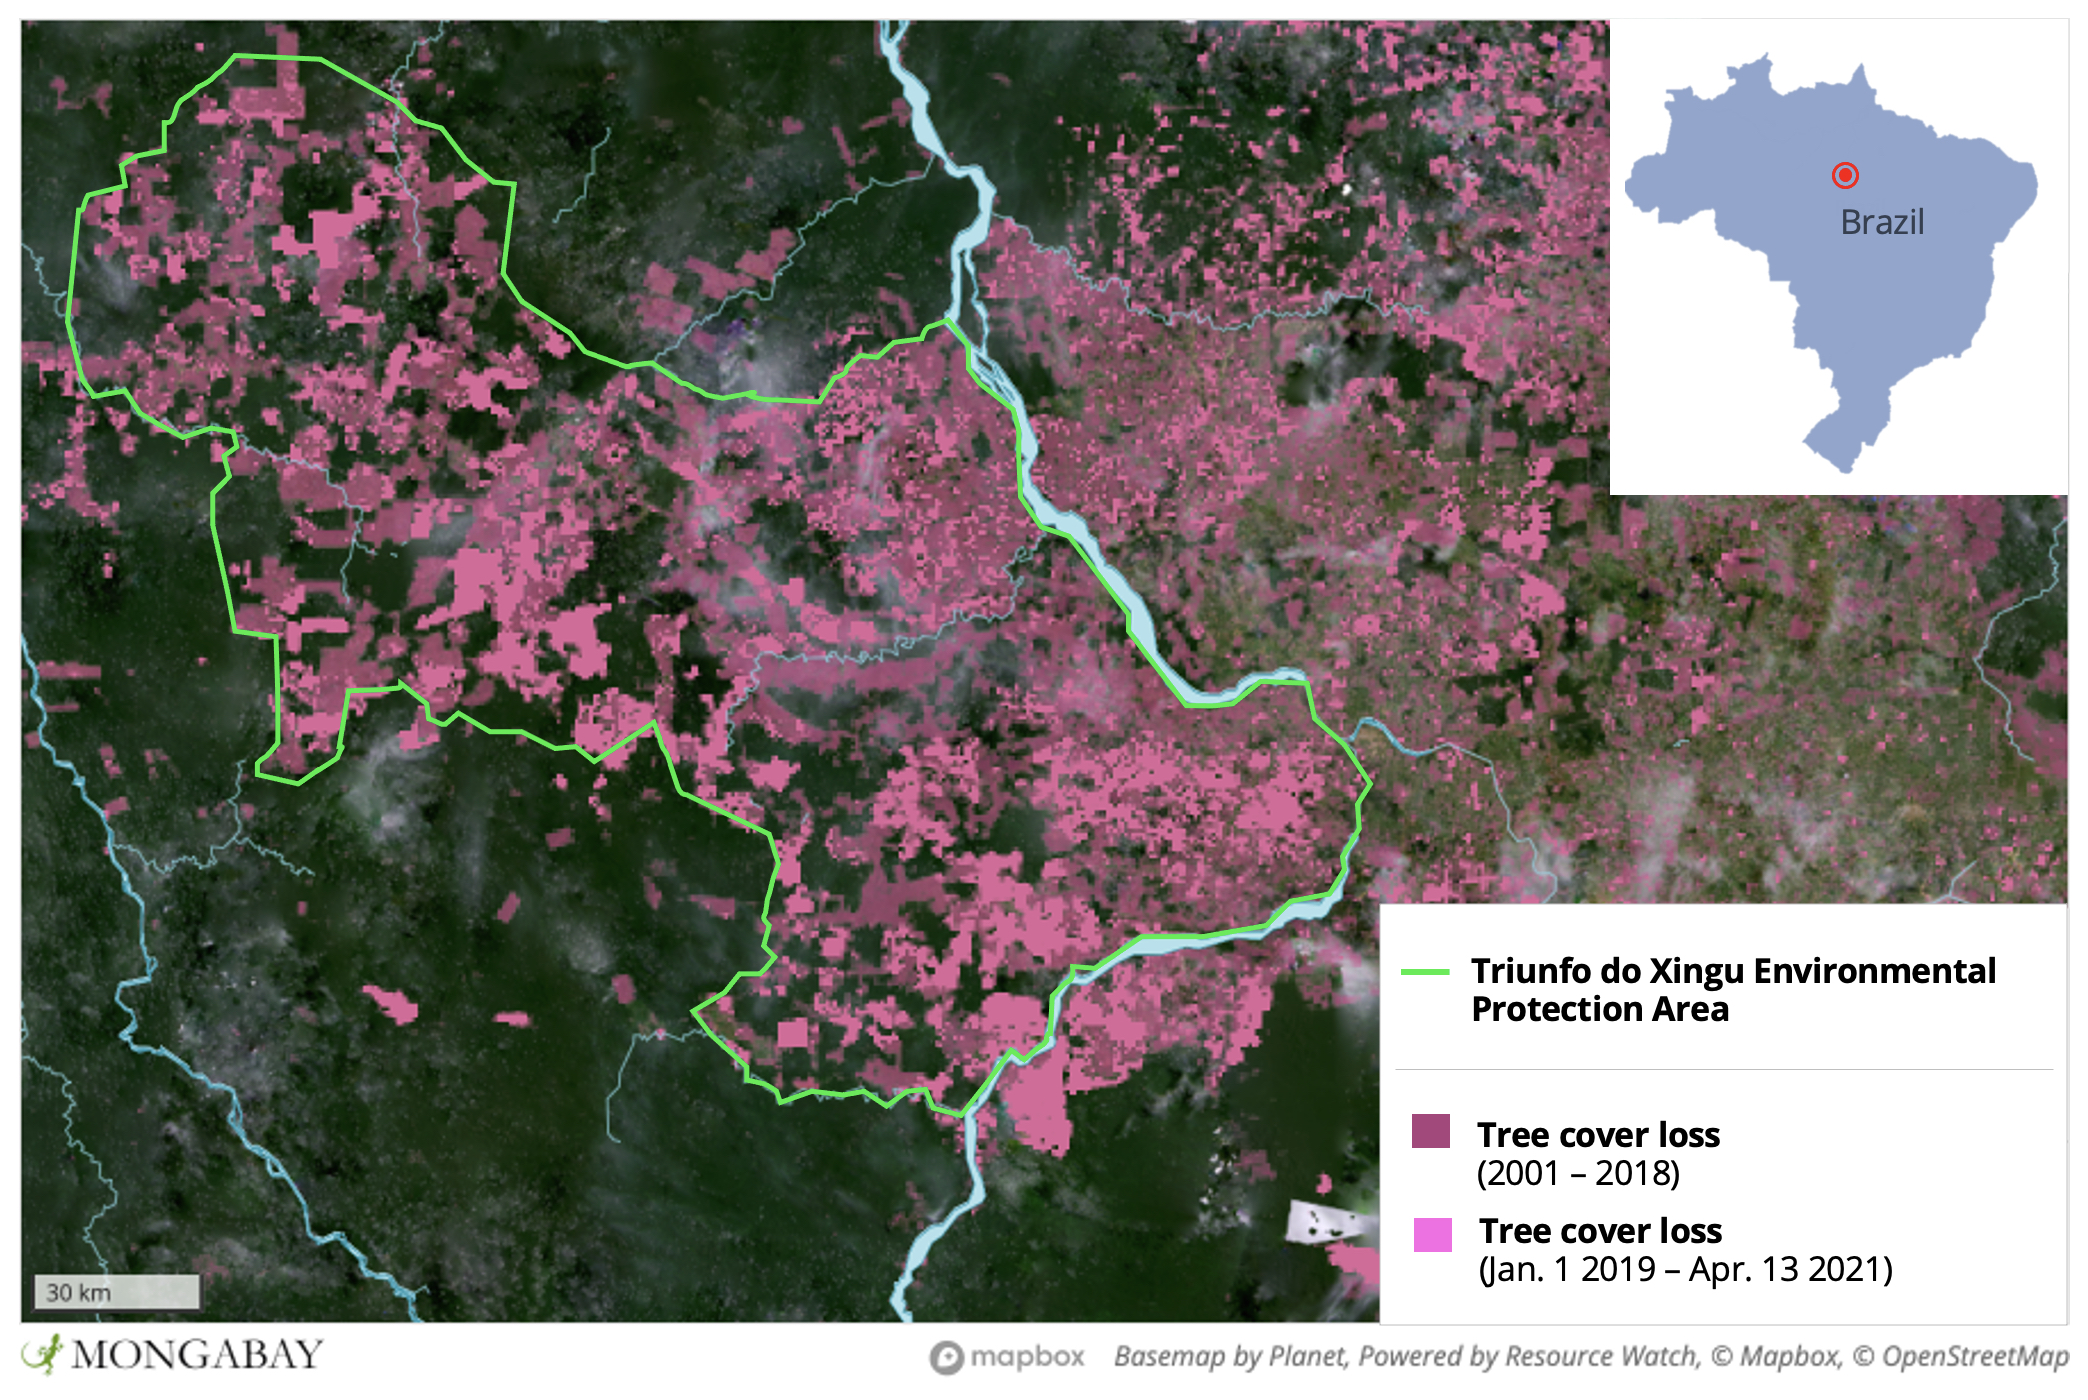 Satellite data from the University of Maryland show much of Triunfo do Xingu has been cleared since 2001.